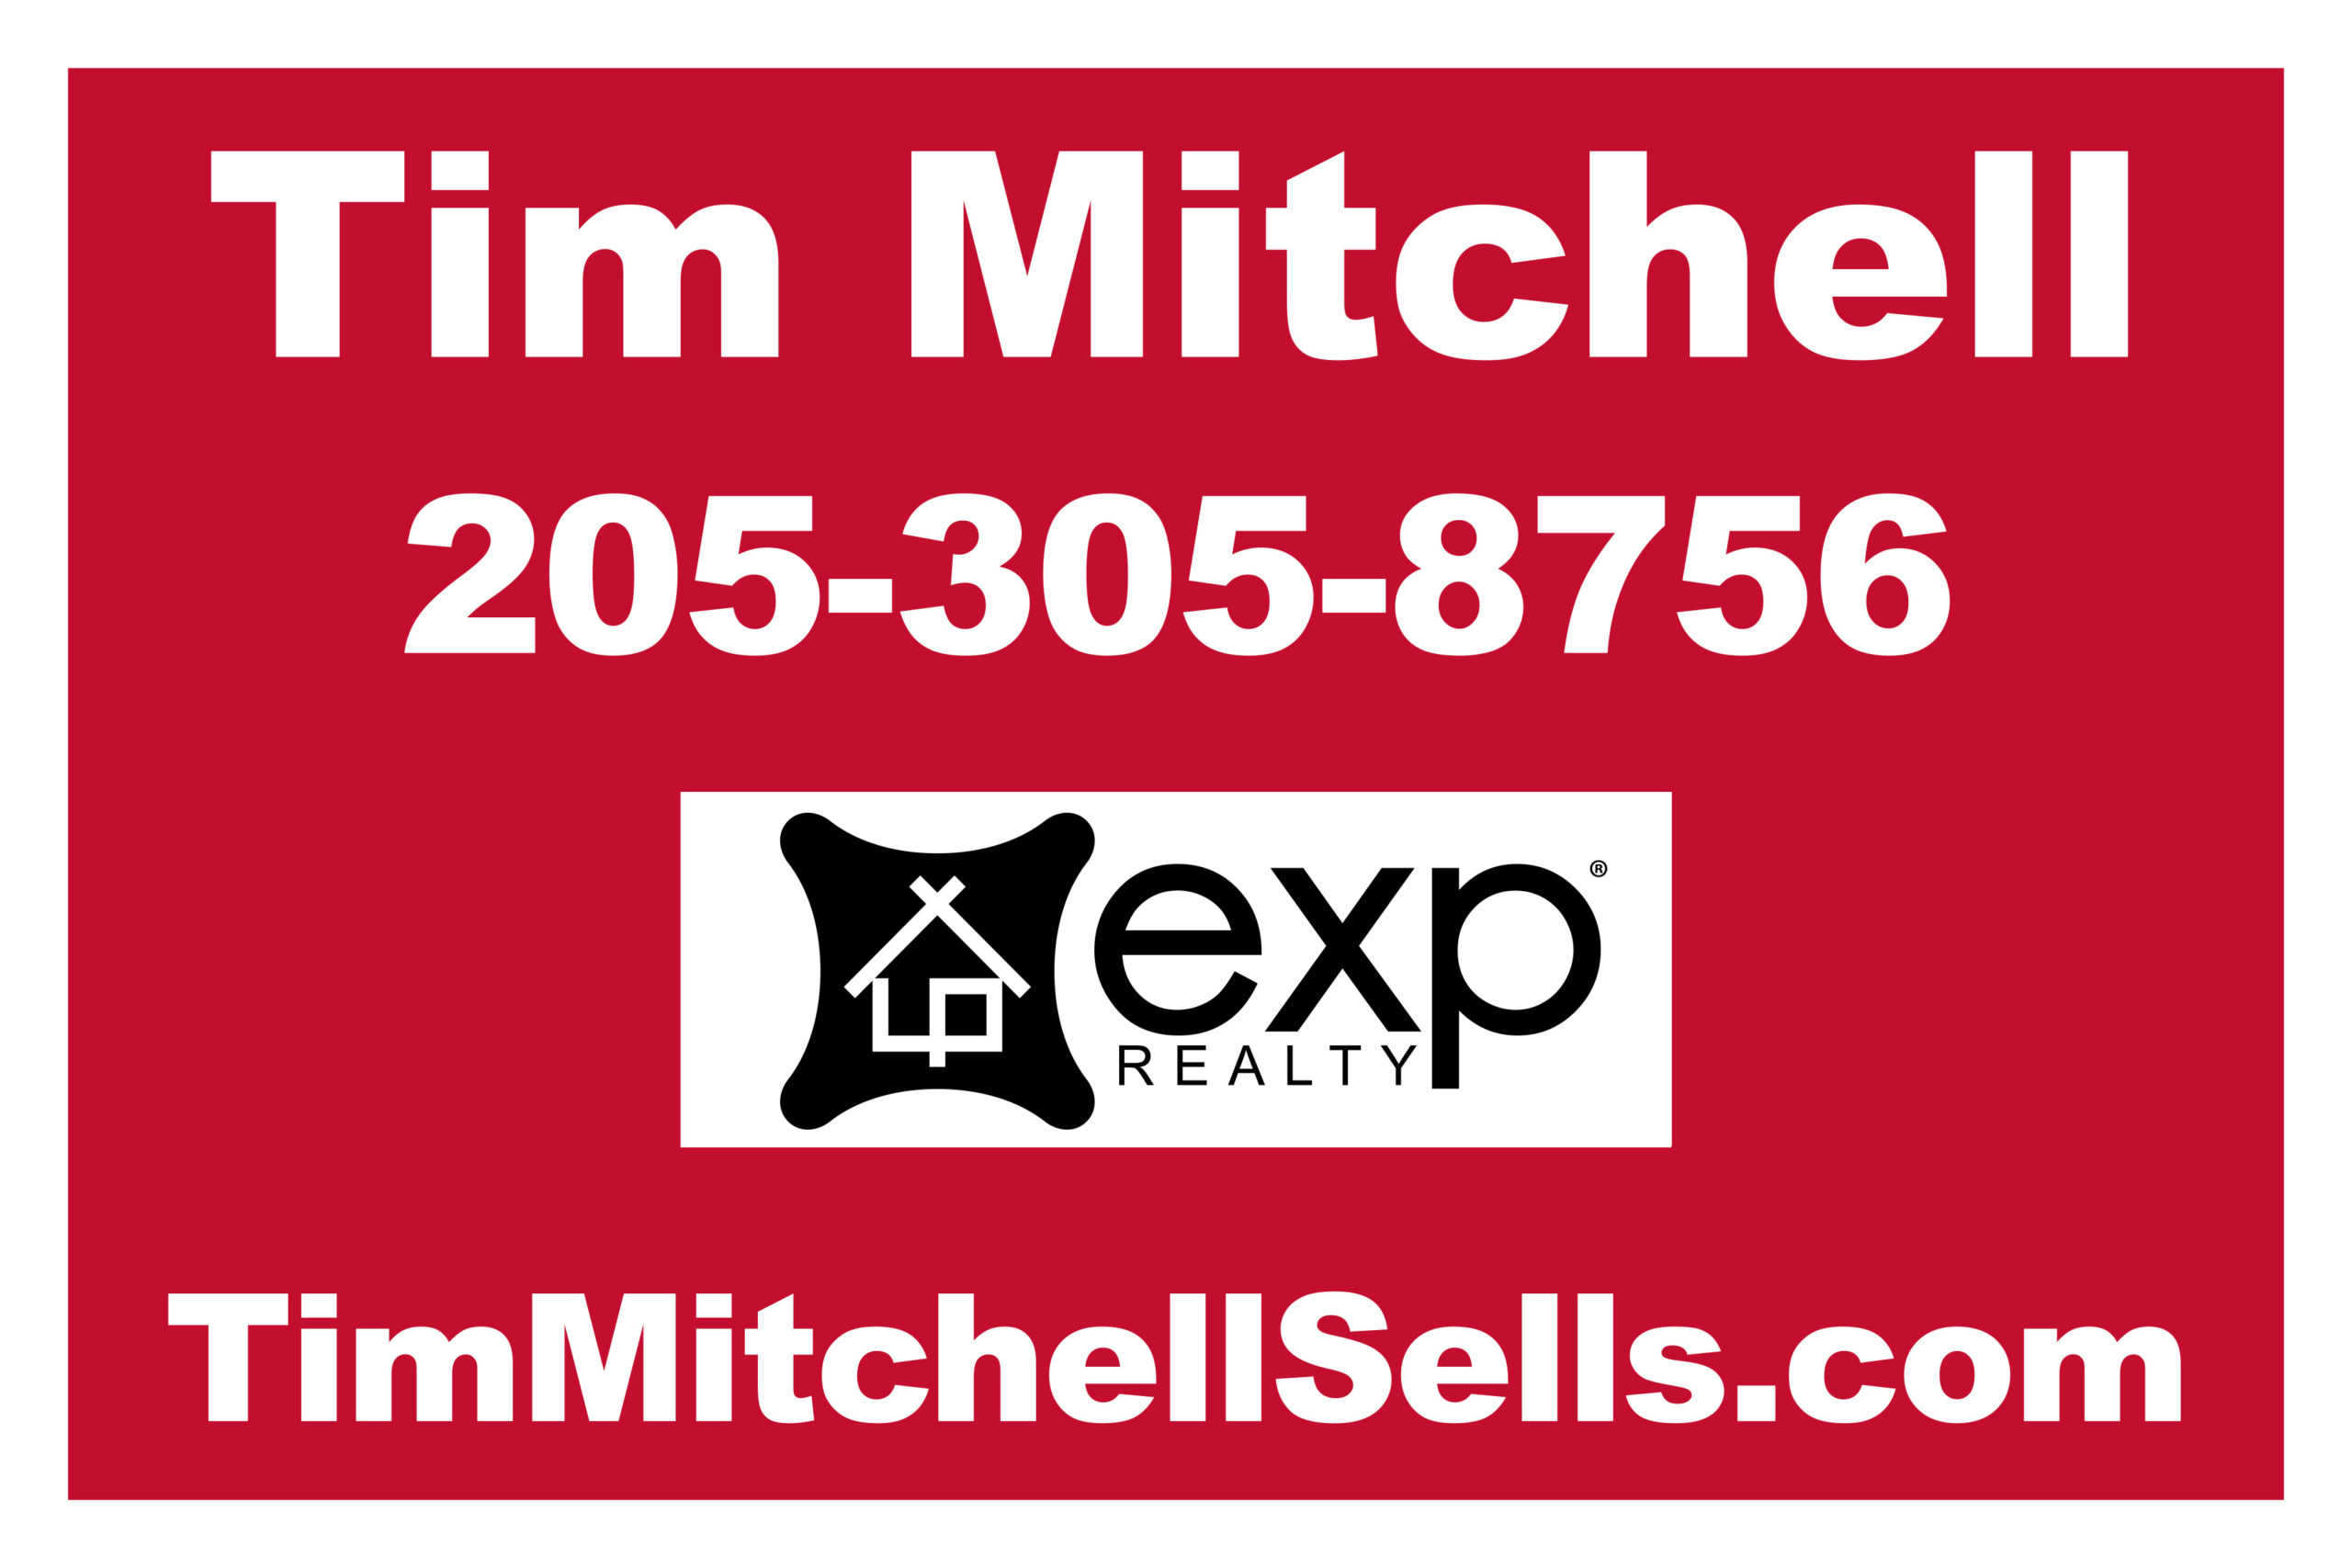 tim mitchell exp realty